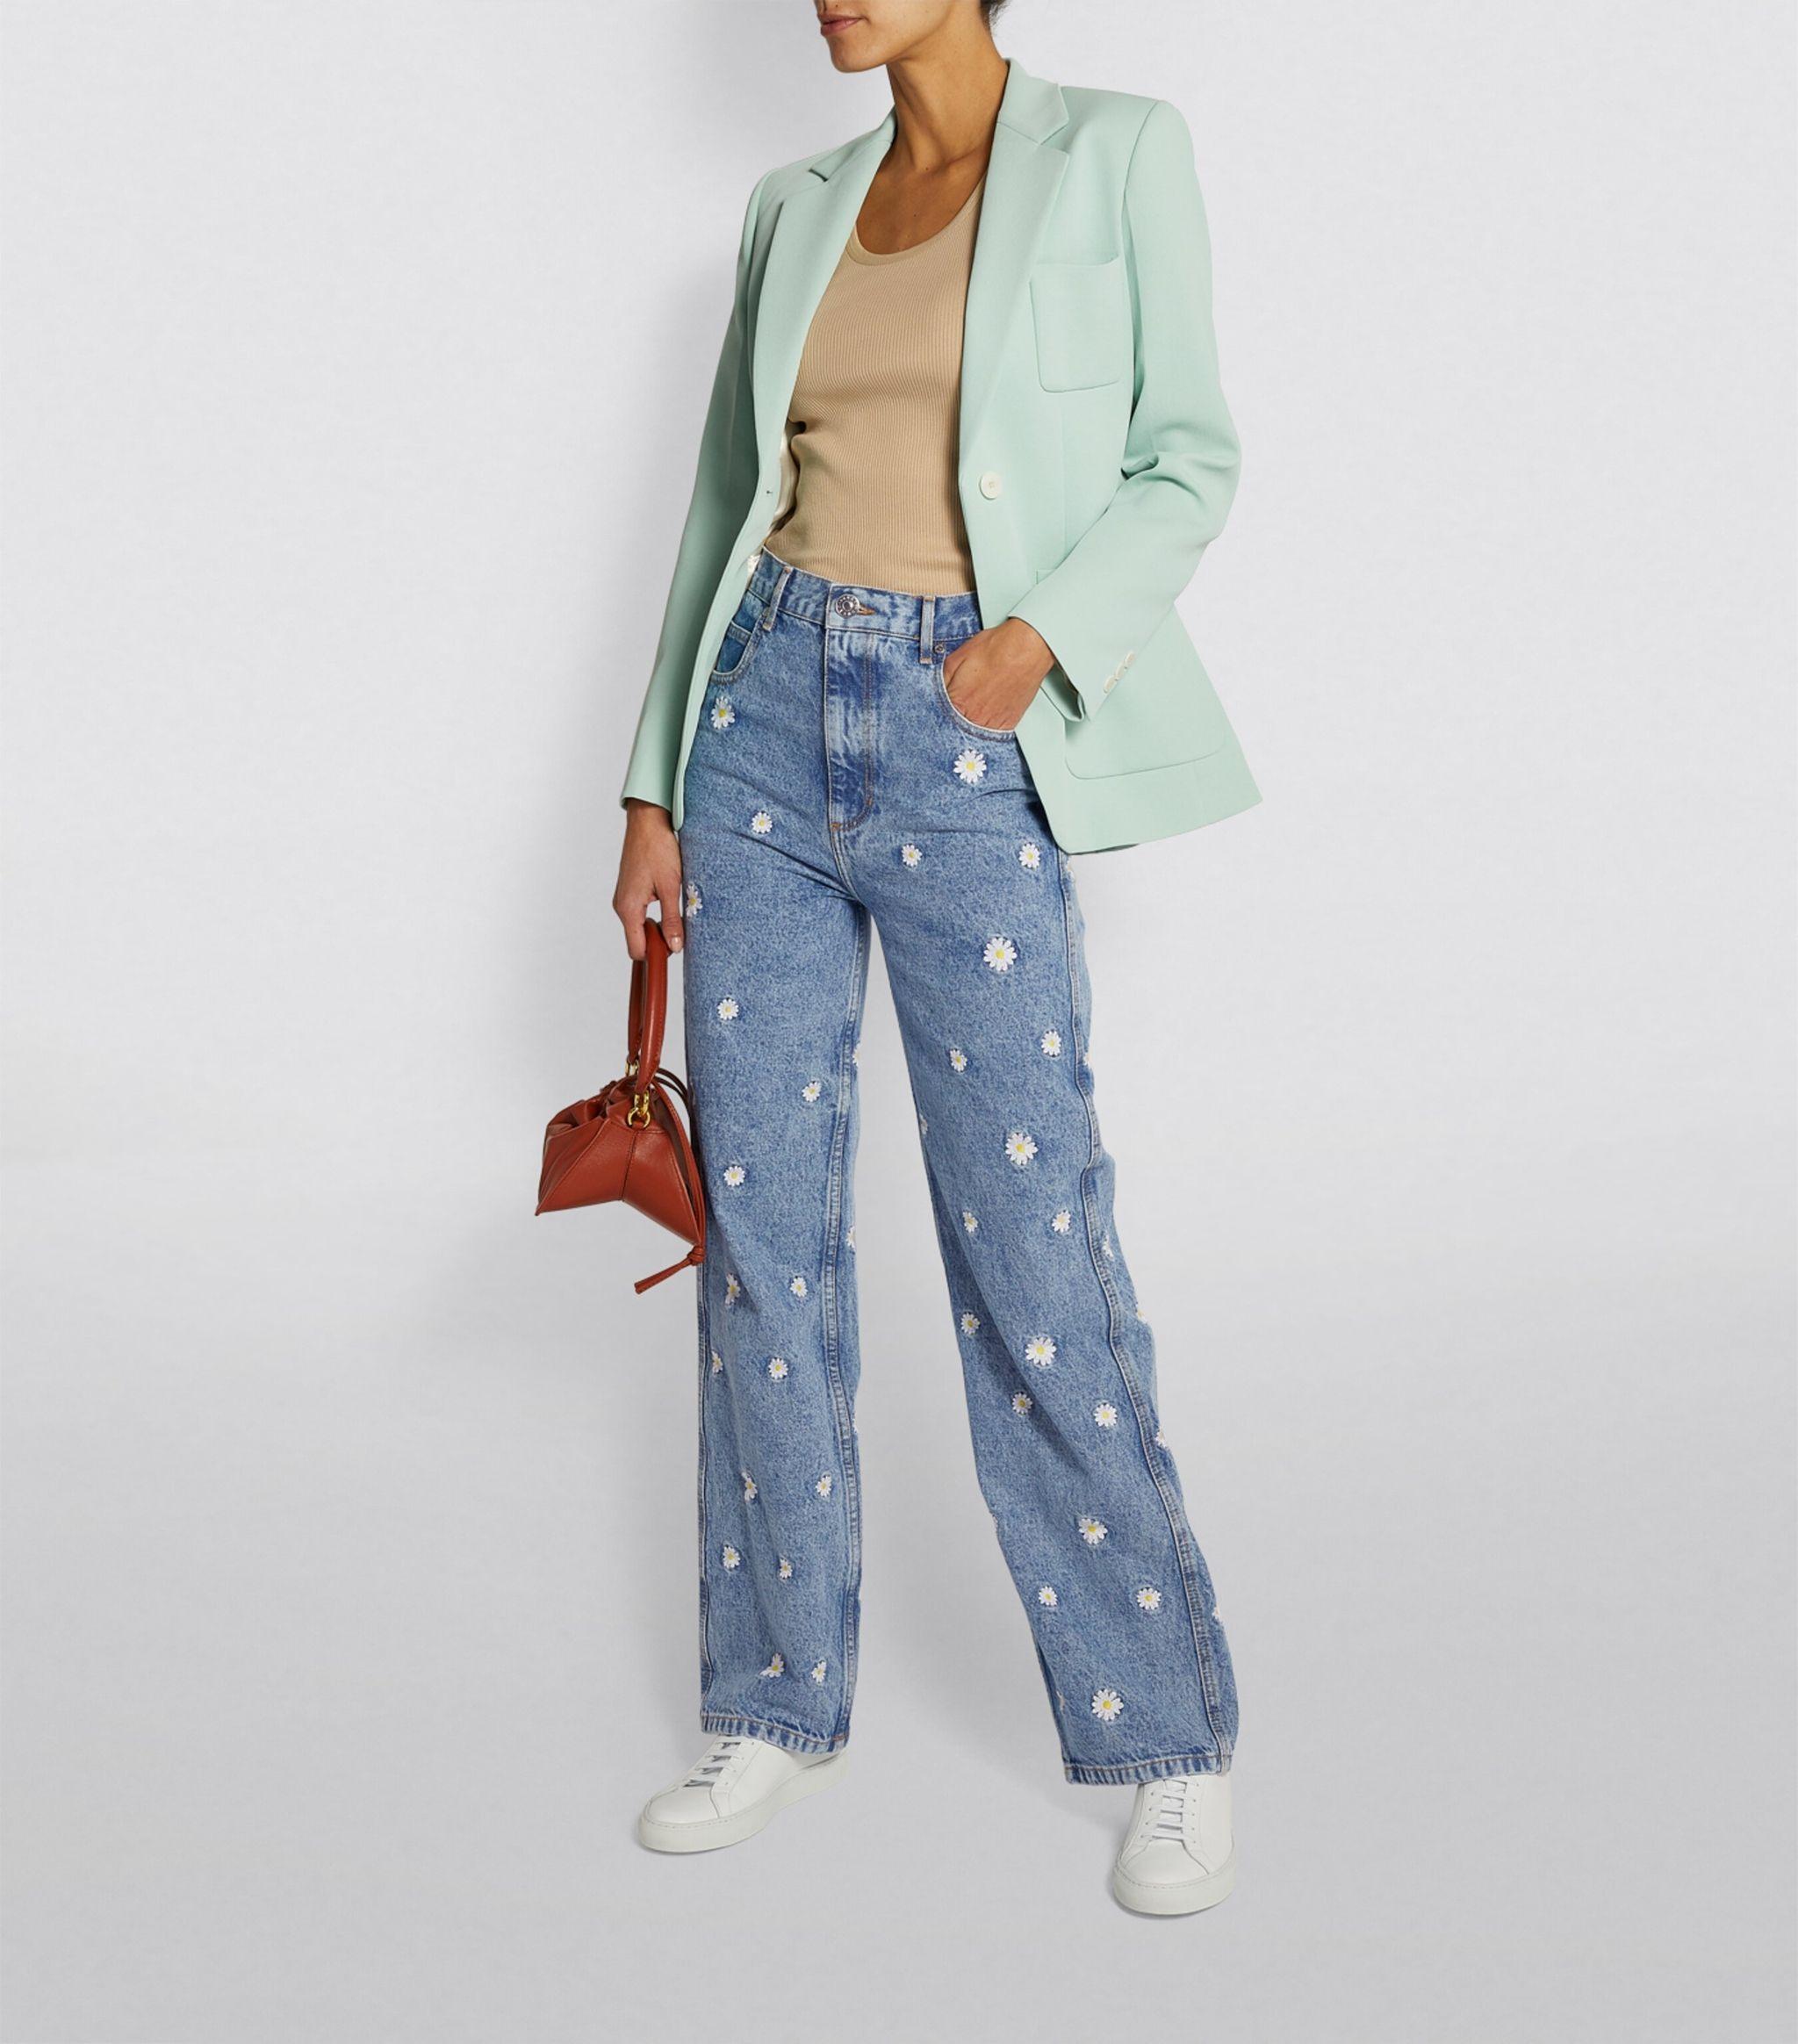 Sandro Embroidered Floral Jeans in Blue | Lyst